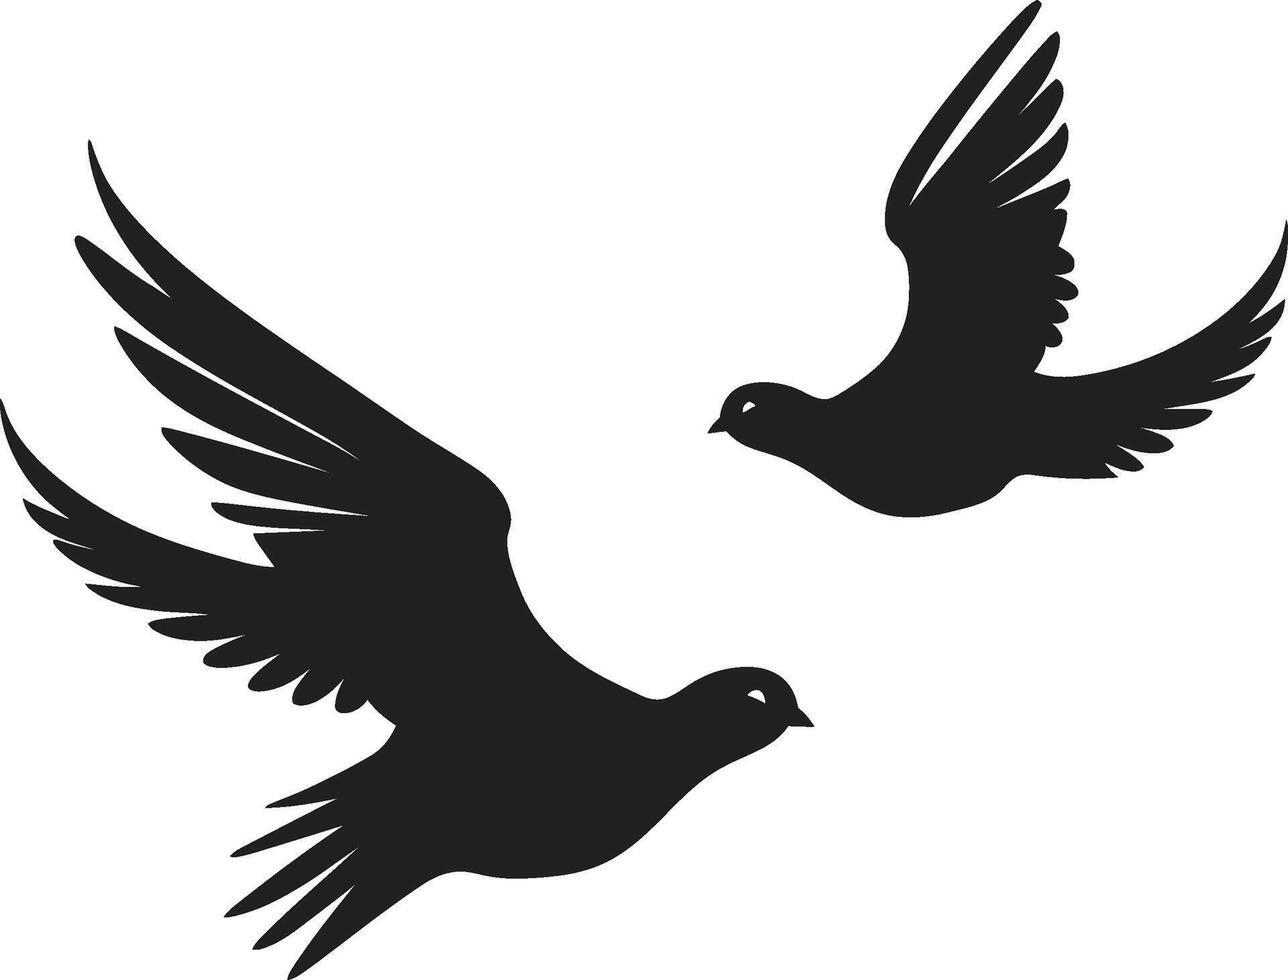 Winged Unity Dove Pair Loves Flight Path of a Dove Pair vector